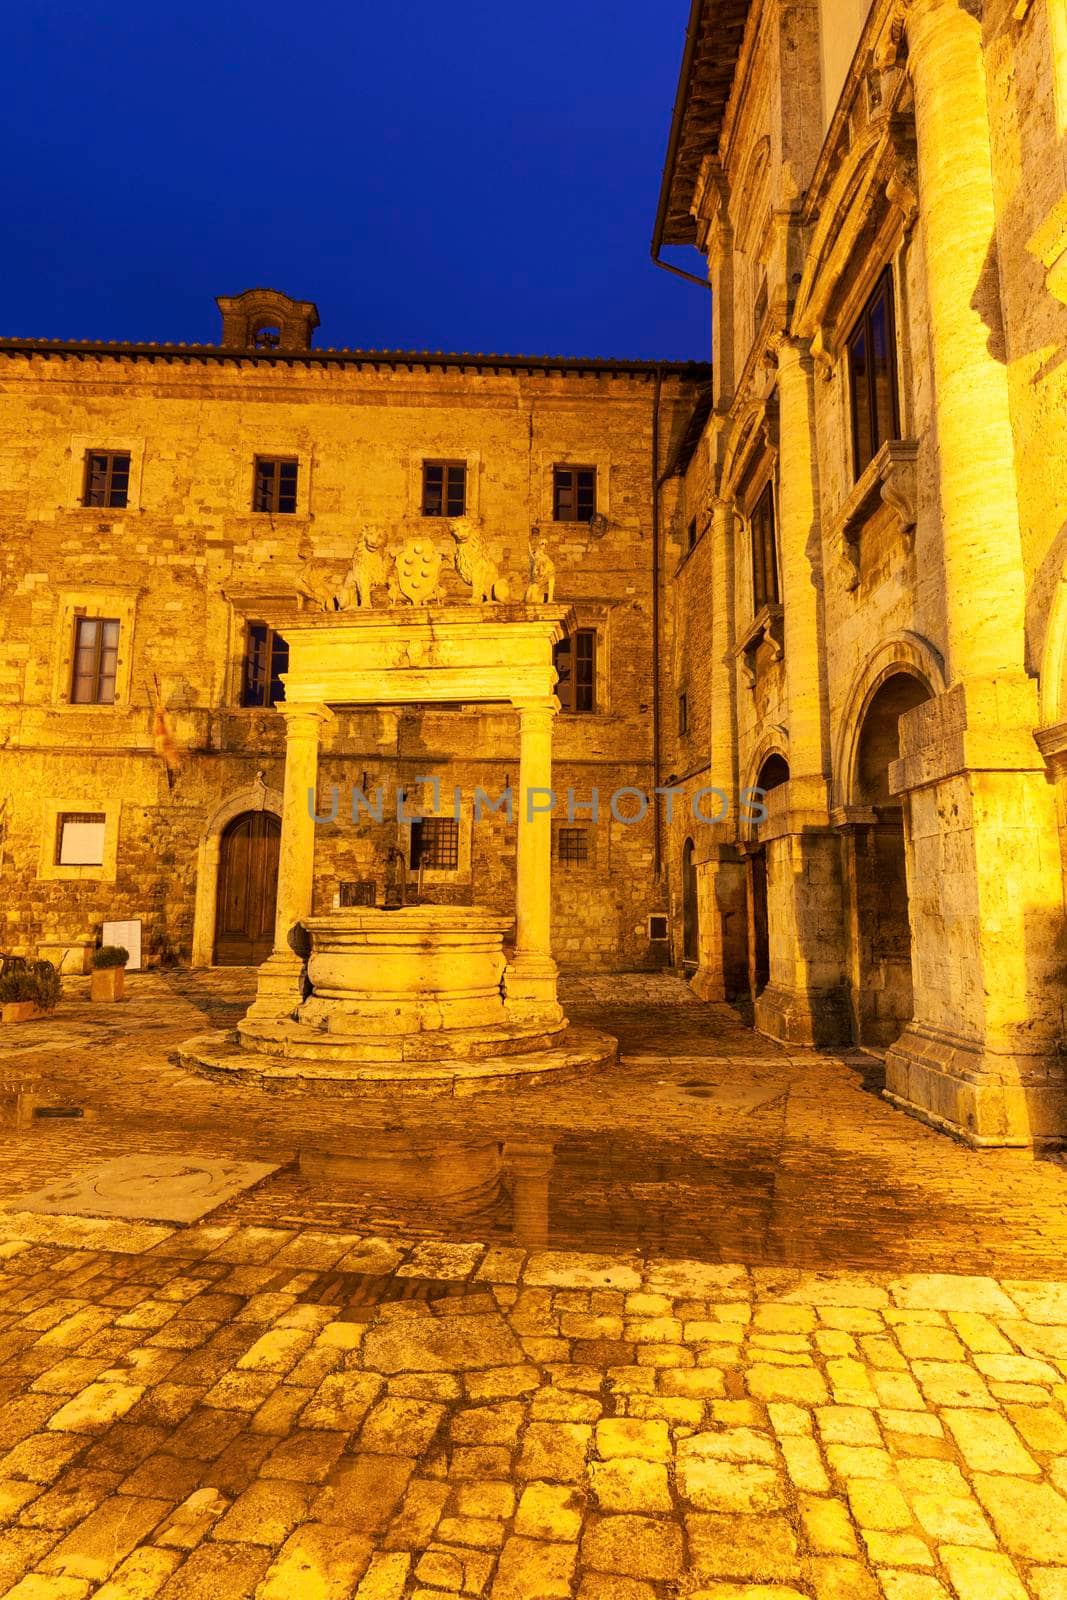 Old well on Piazza Grande in Montepulciano. Montepulciano, Tuscany, Italy